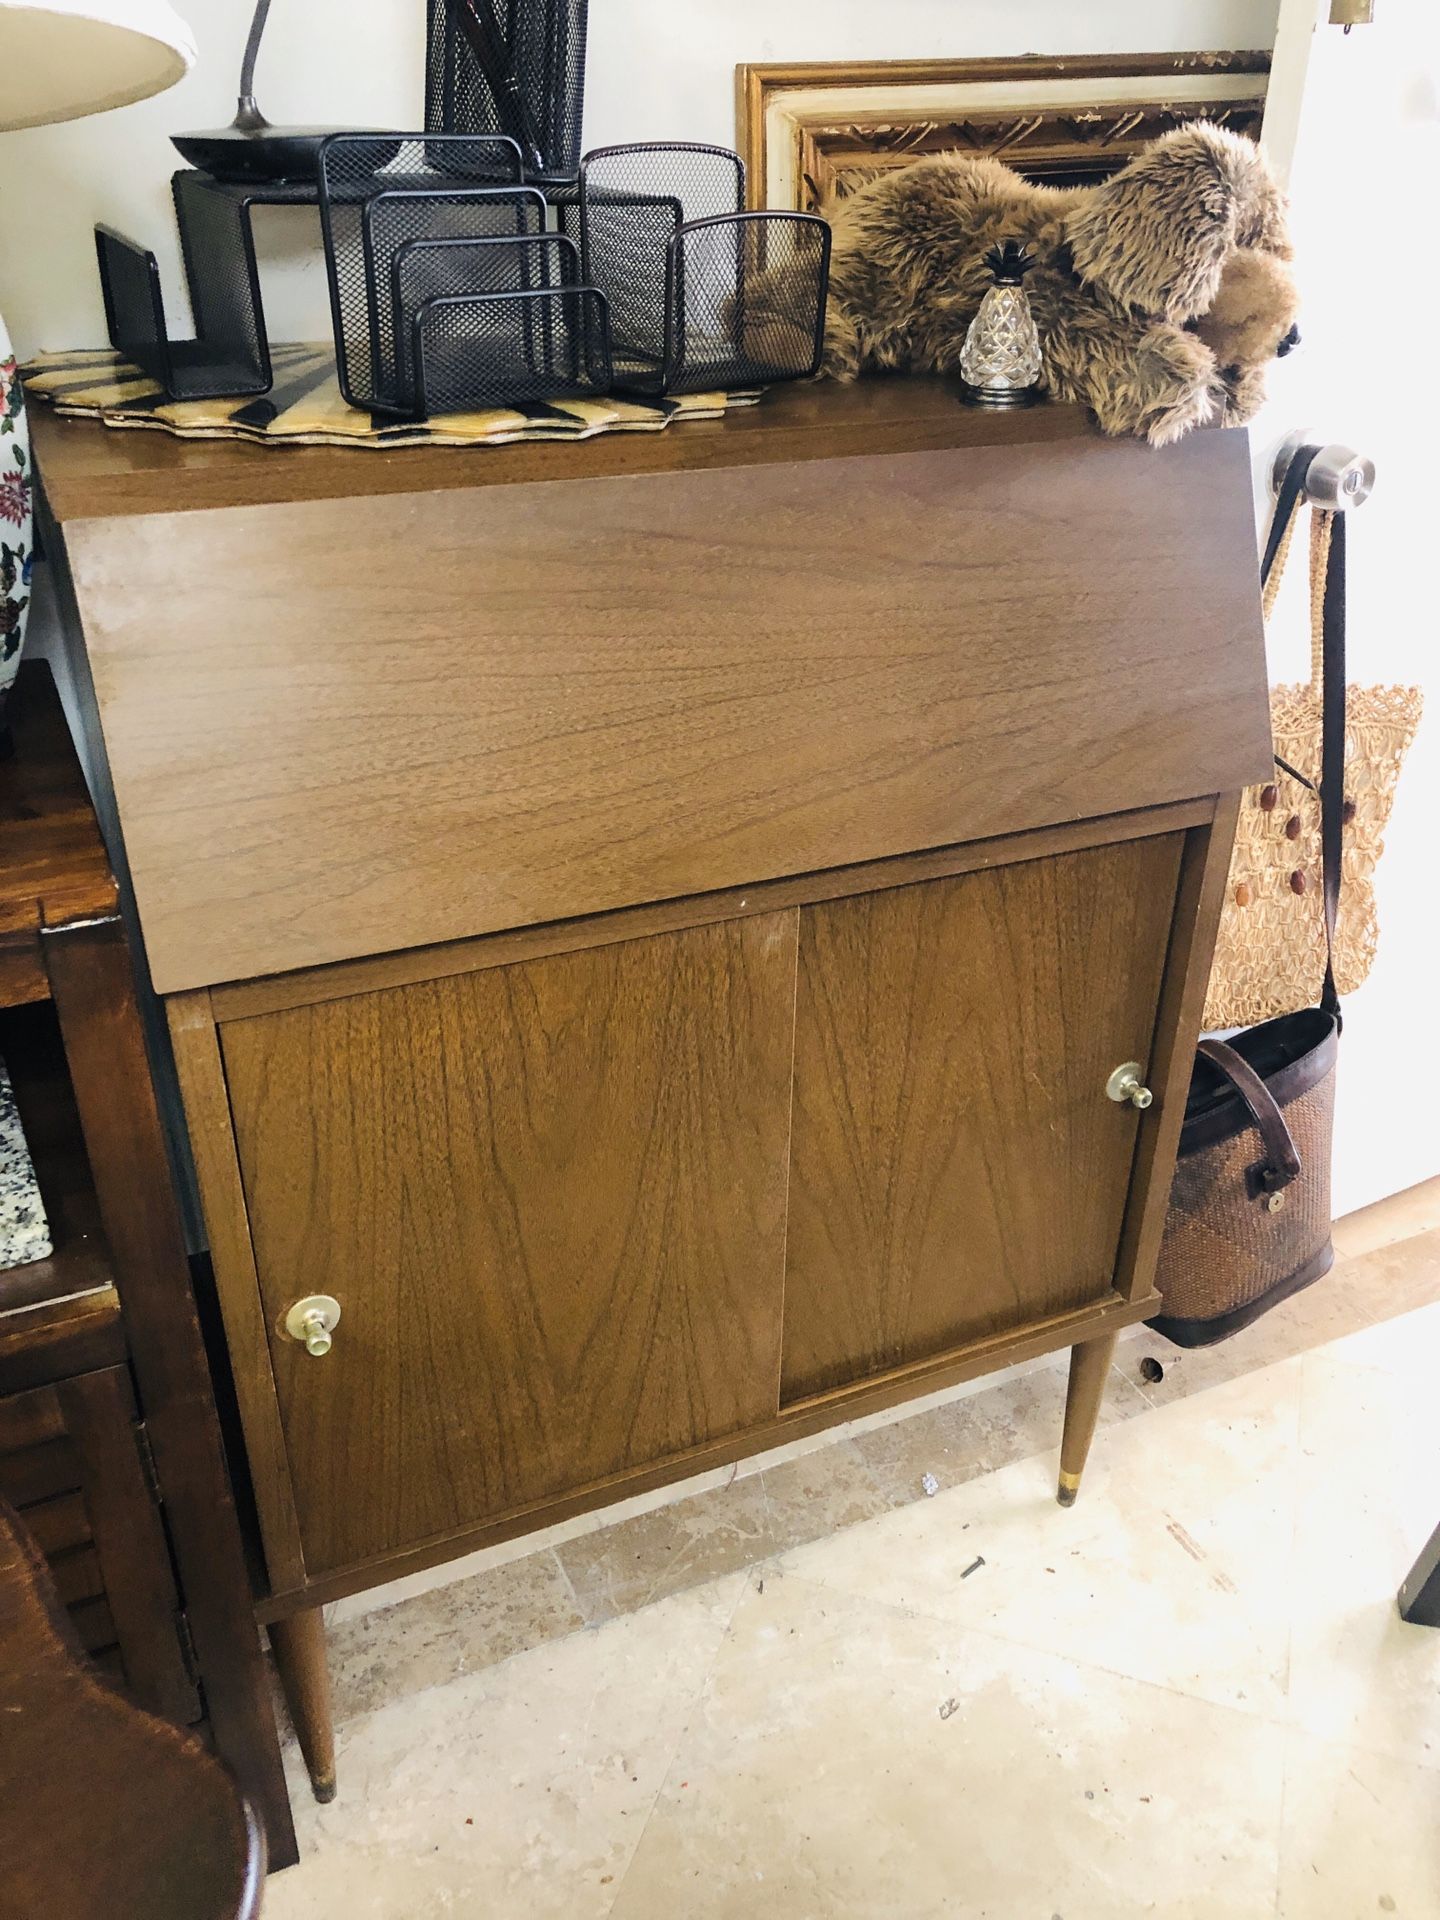 🚧🛍CURBSIDE 50% OFF SALE🚗🚧 VINTAGE PETITE SECRETARY DESK W SLIDE CABINET CUS $FIRM *Zelle Paypal Holds *FREE 🚚 EAST LOCAL GROUND